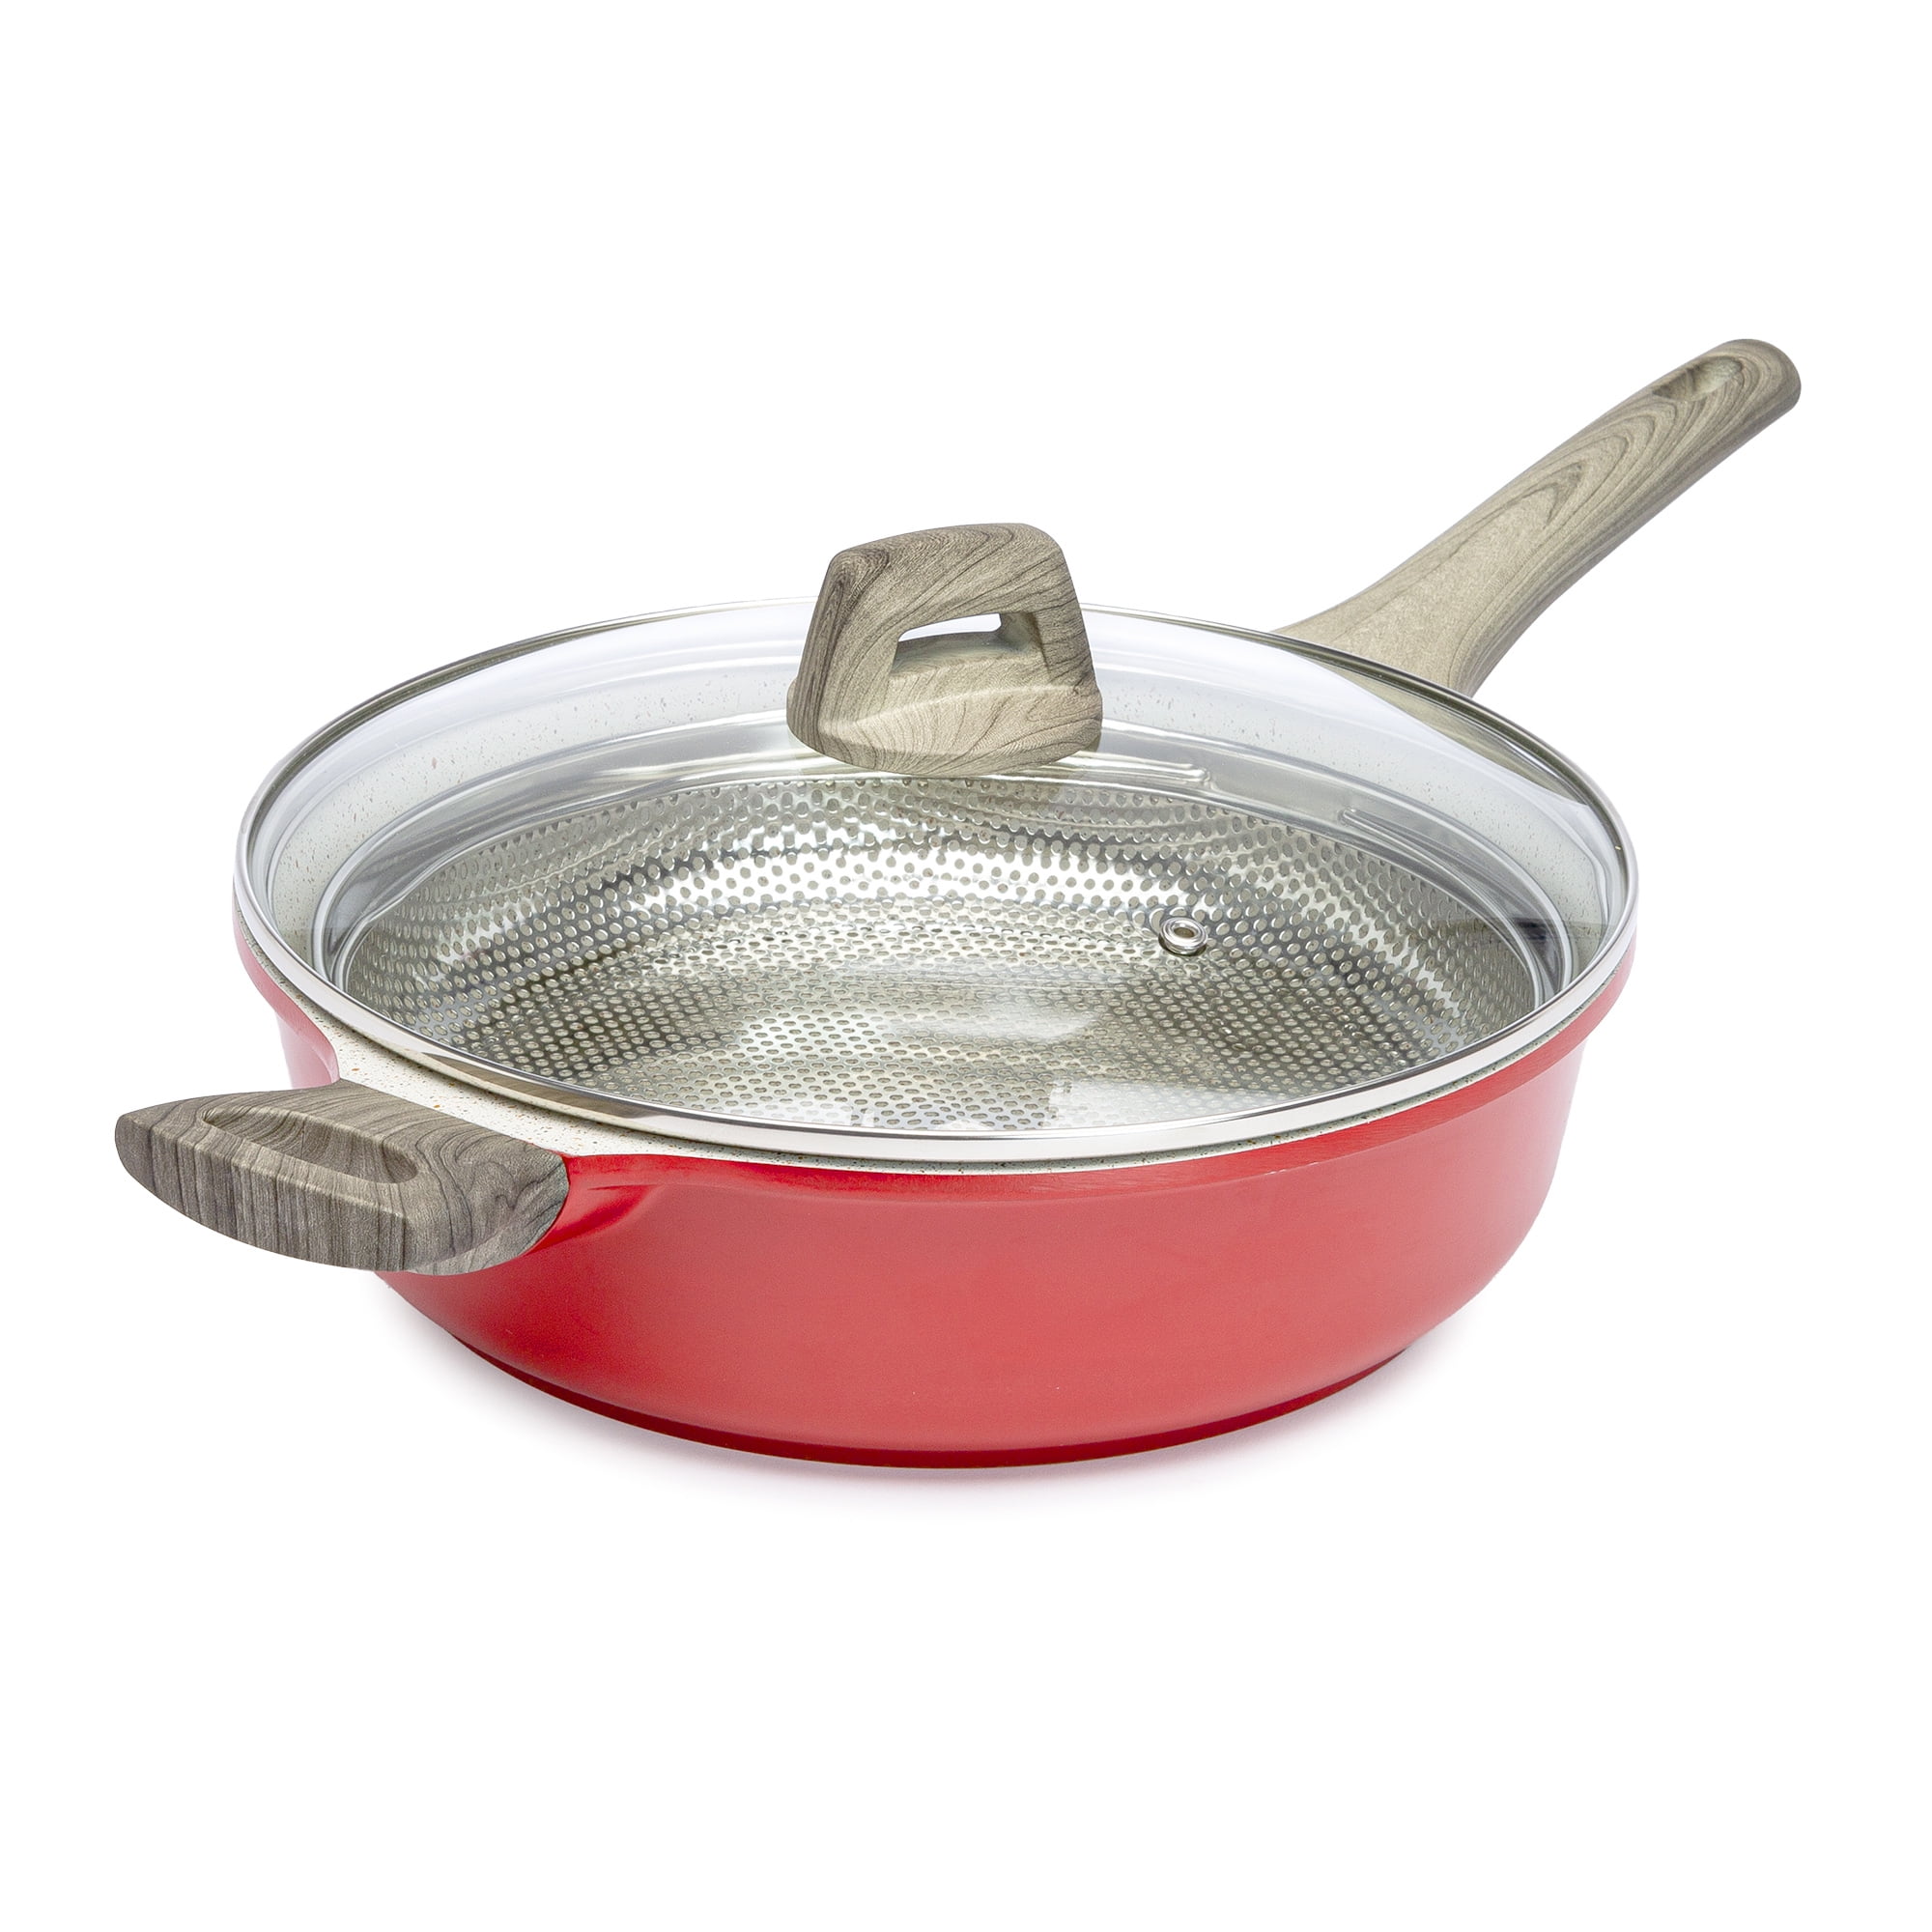 Tasty Clean Ceramic 13 inch Non-Stick Aluminum Centerpiece Saut Pan with Glass Lid, Red